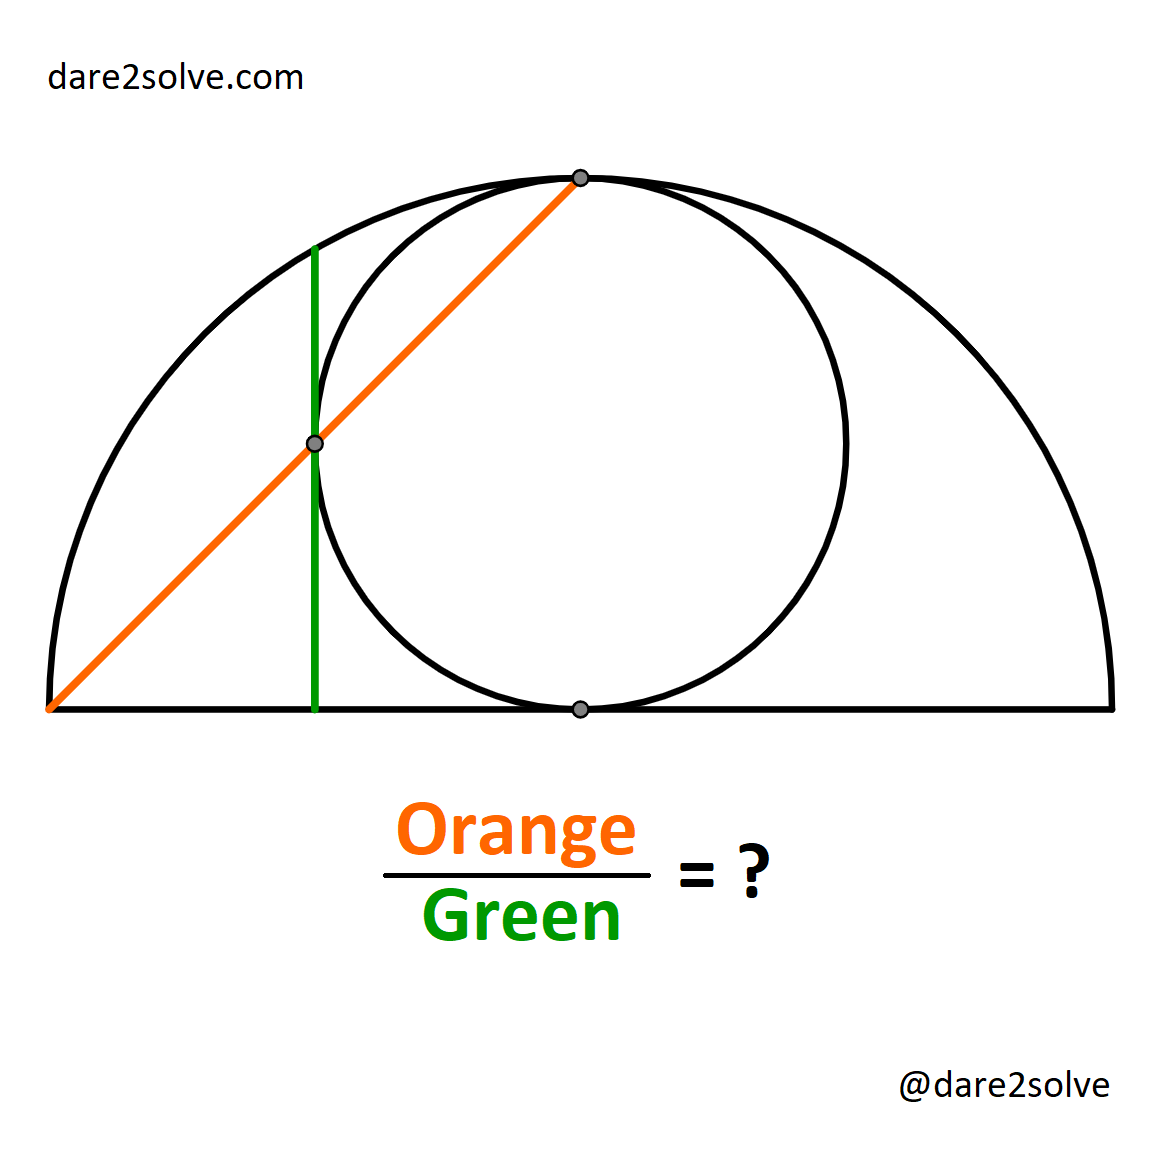 Solution will be uploaded on dare2solve.com after 24 hours • Follow my page for more such content @dare2solve Follow, Like, Comment and Share. • • #math #circle